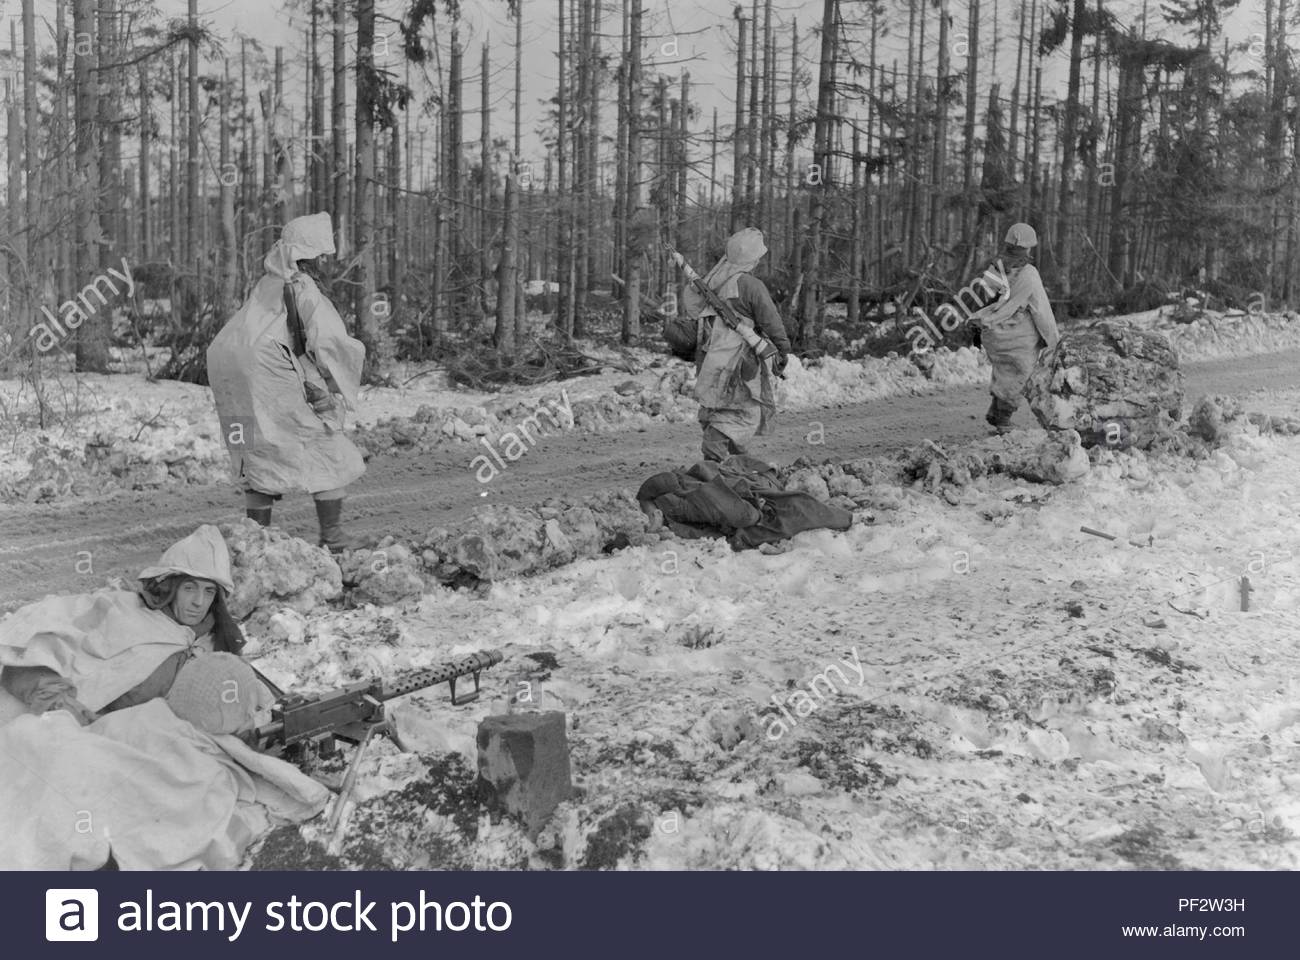 9th Infantry Division Stock Photos & 9th Infantry Division Stock Images - Alamy1300 x 960